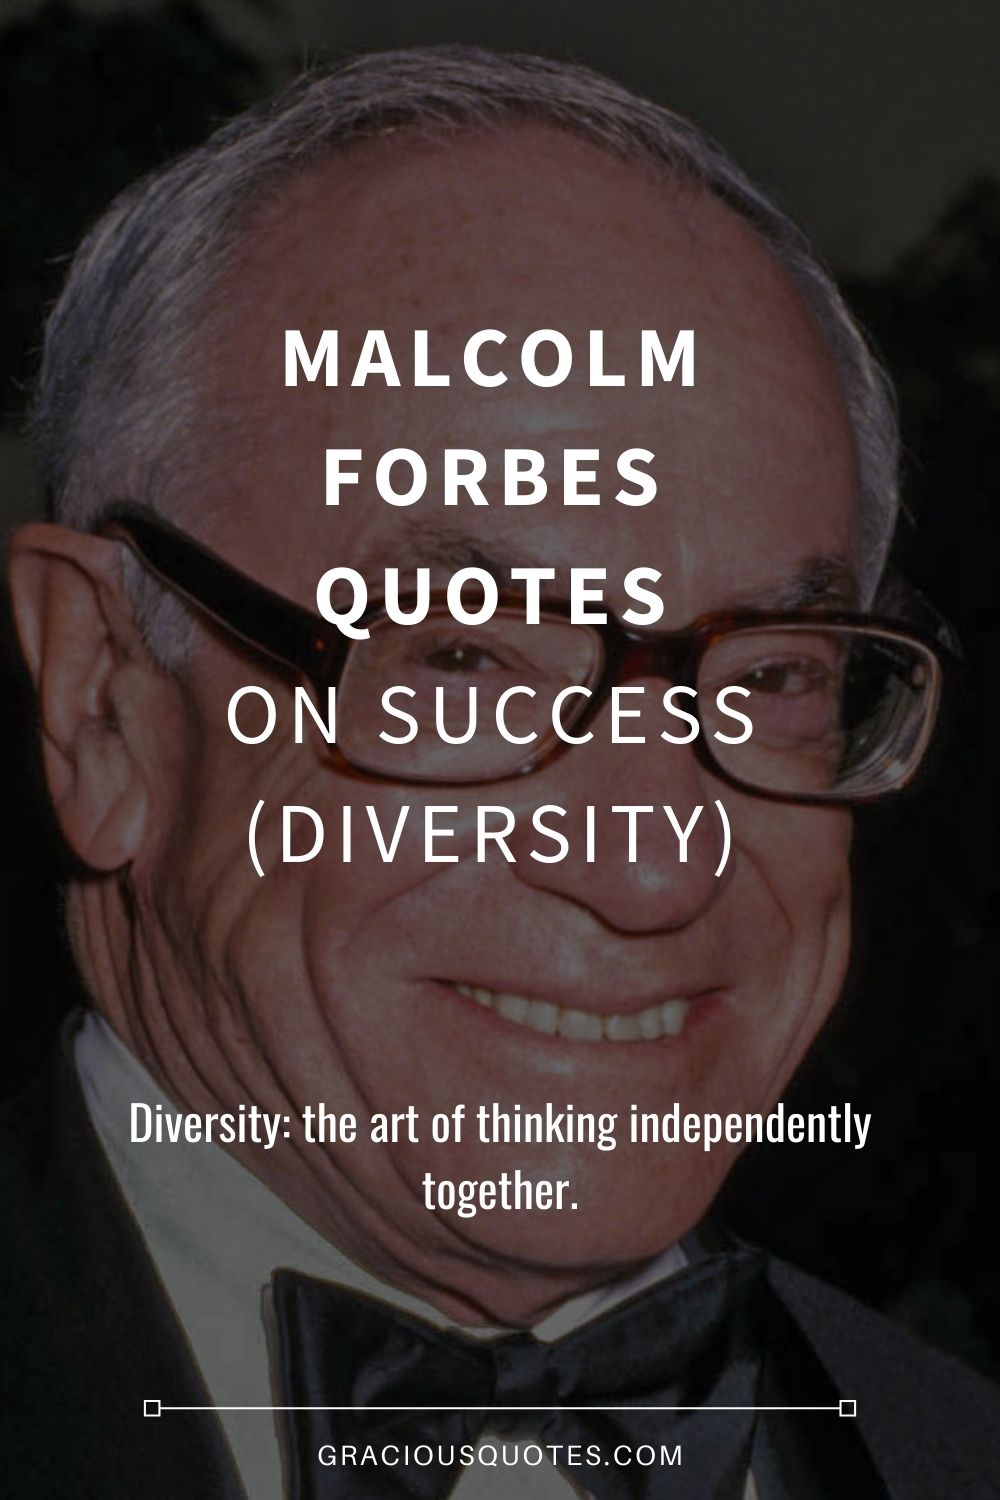 36 Malcolm Forbes Quotes on Success (DIVERSITY) - Gracious Quotes